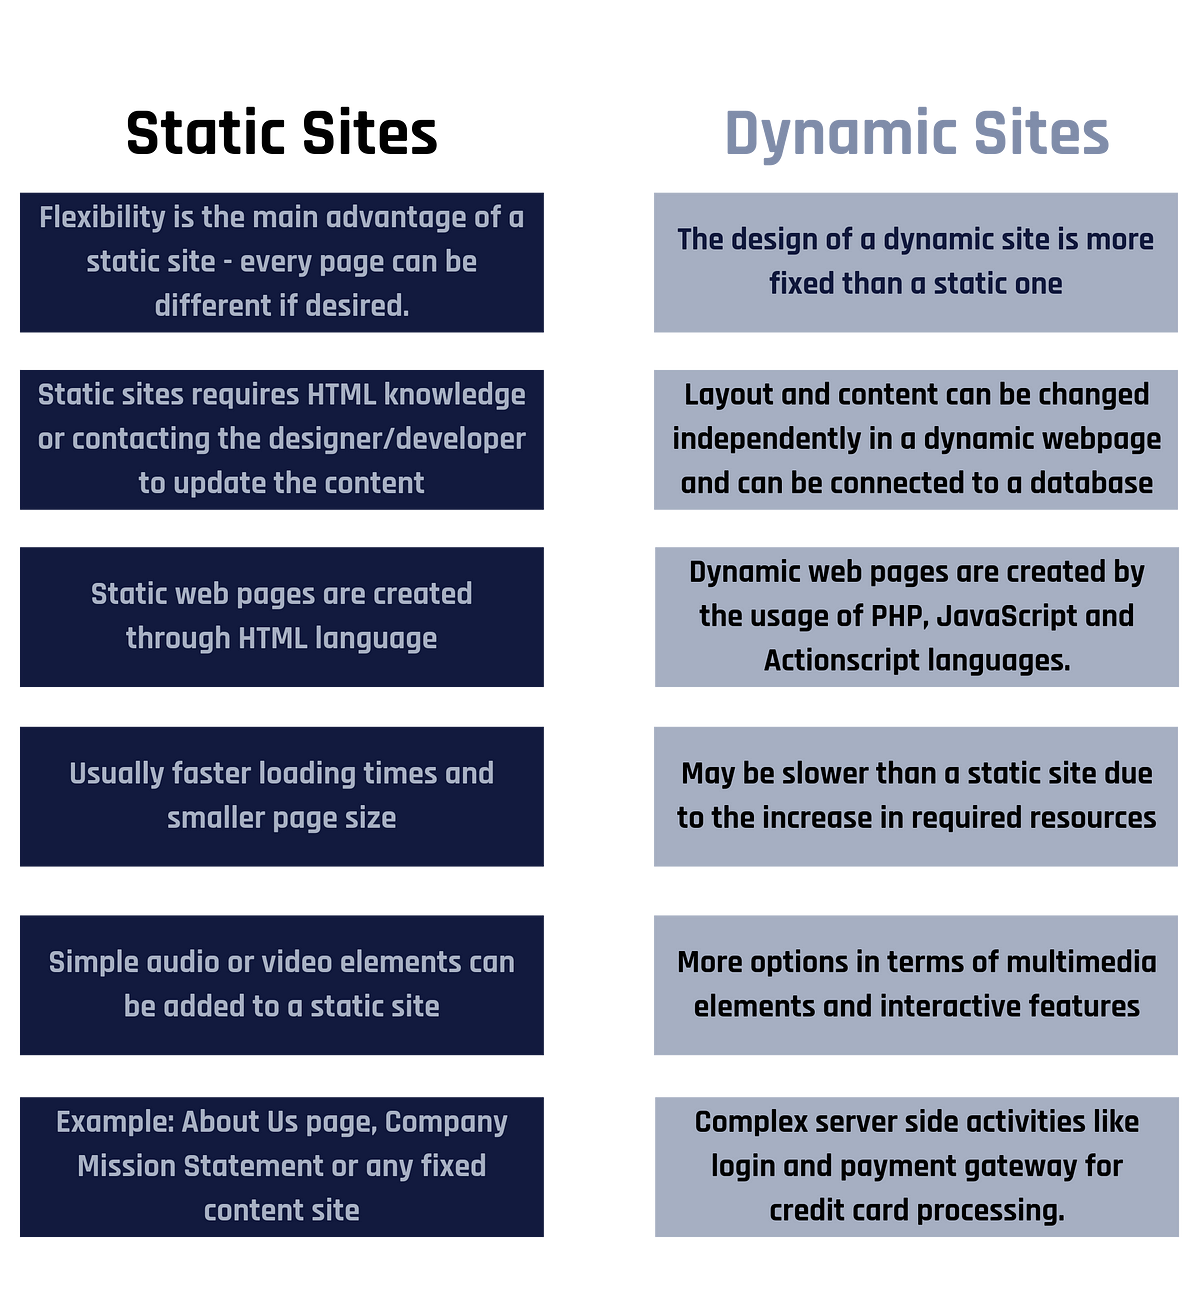 What are the difference between static and dynamic Web pages?